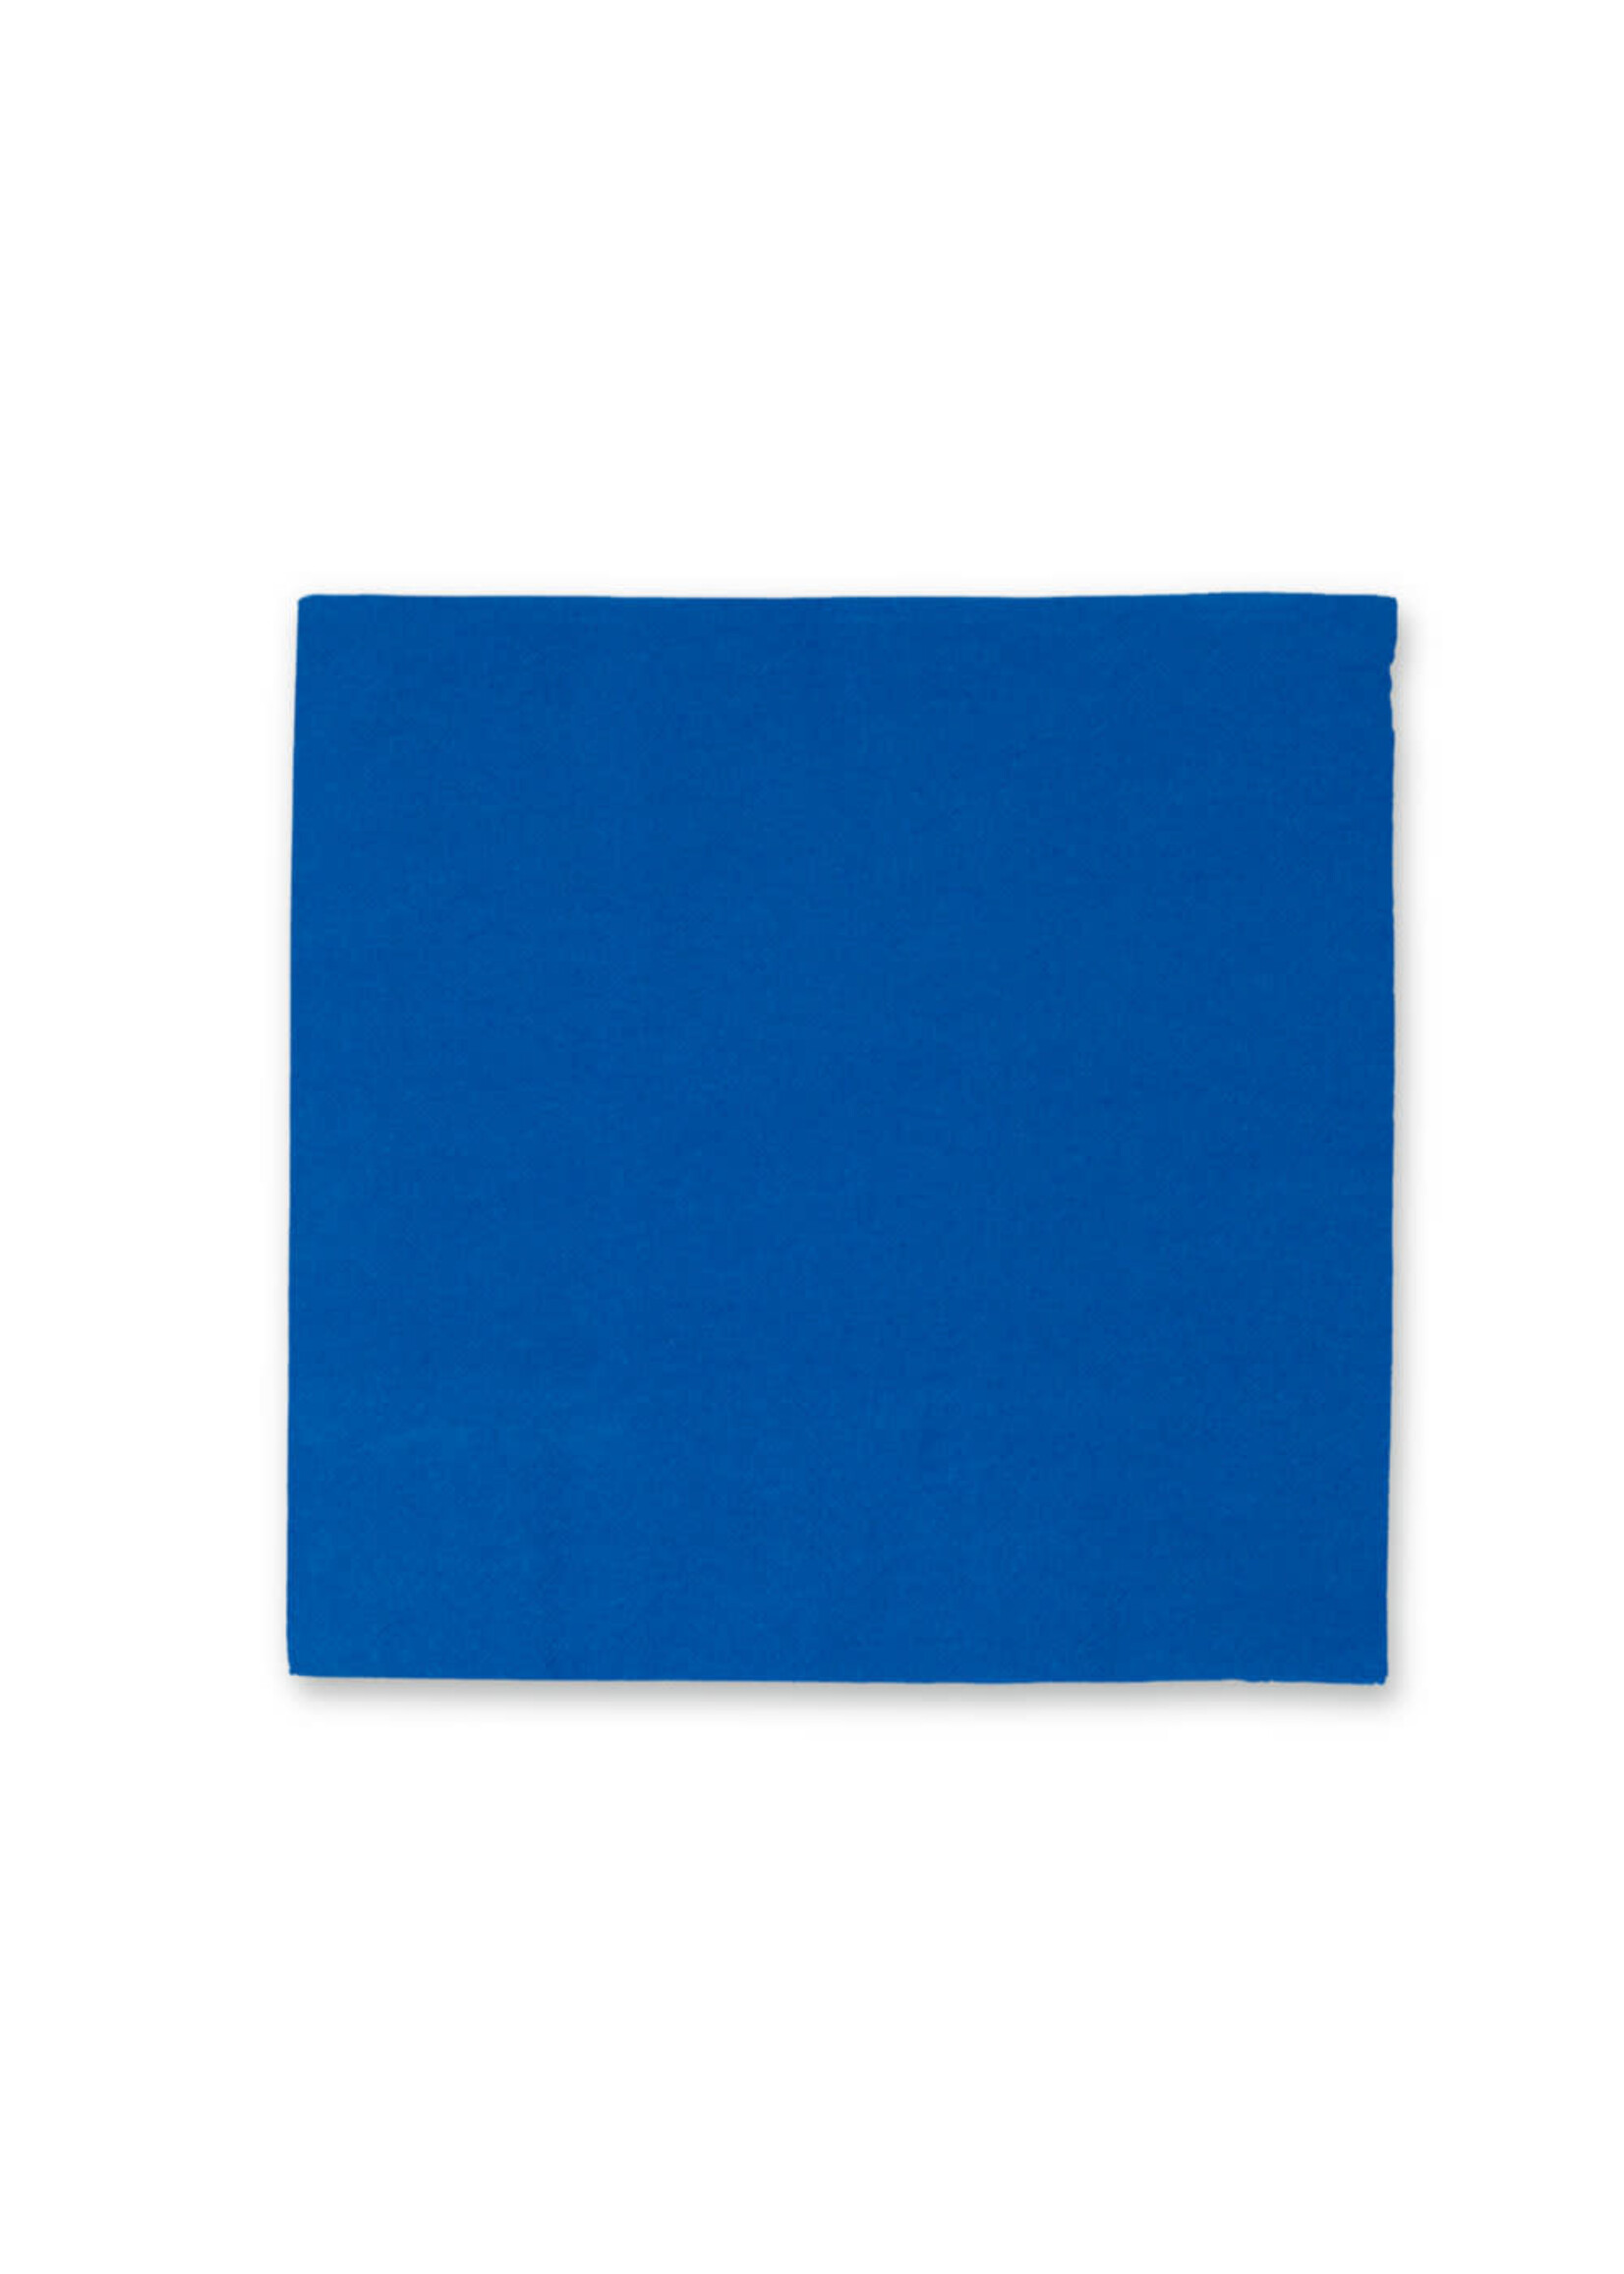 LUNCH NAPKIN 50CT 2PLY ROYAL BLUE